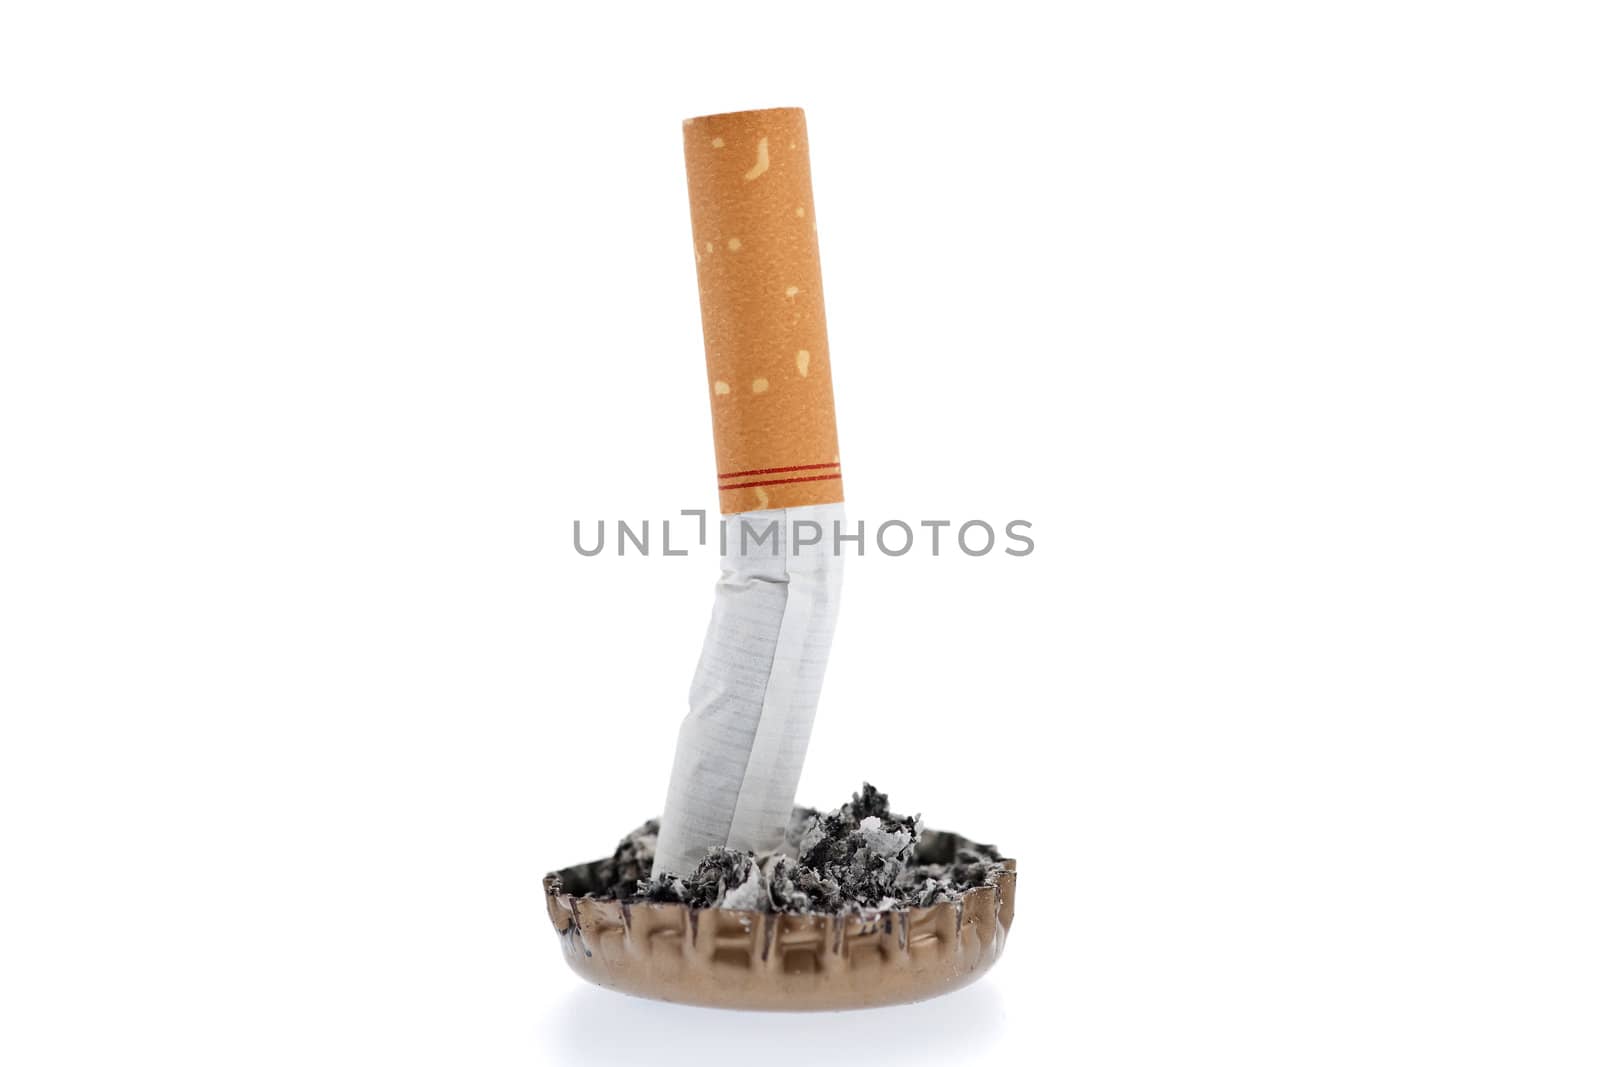 Cigarette butt and ash in a bottle cap by Marcus